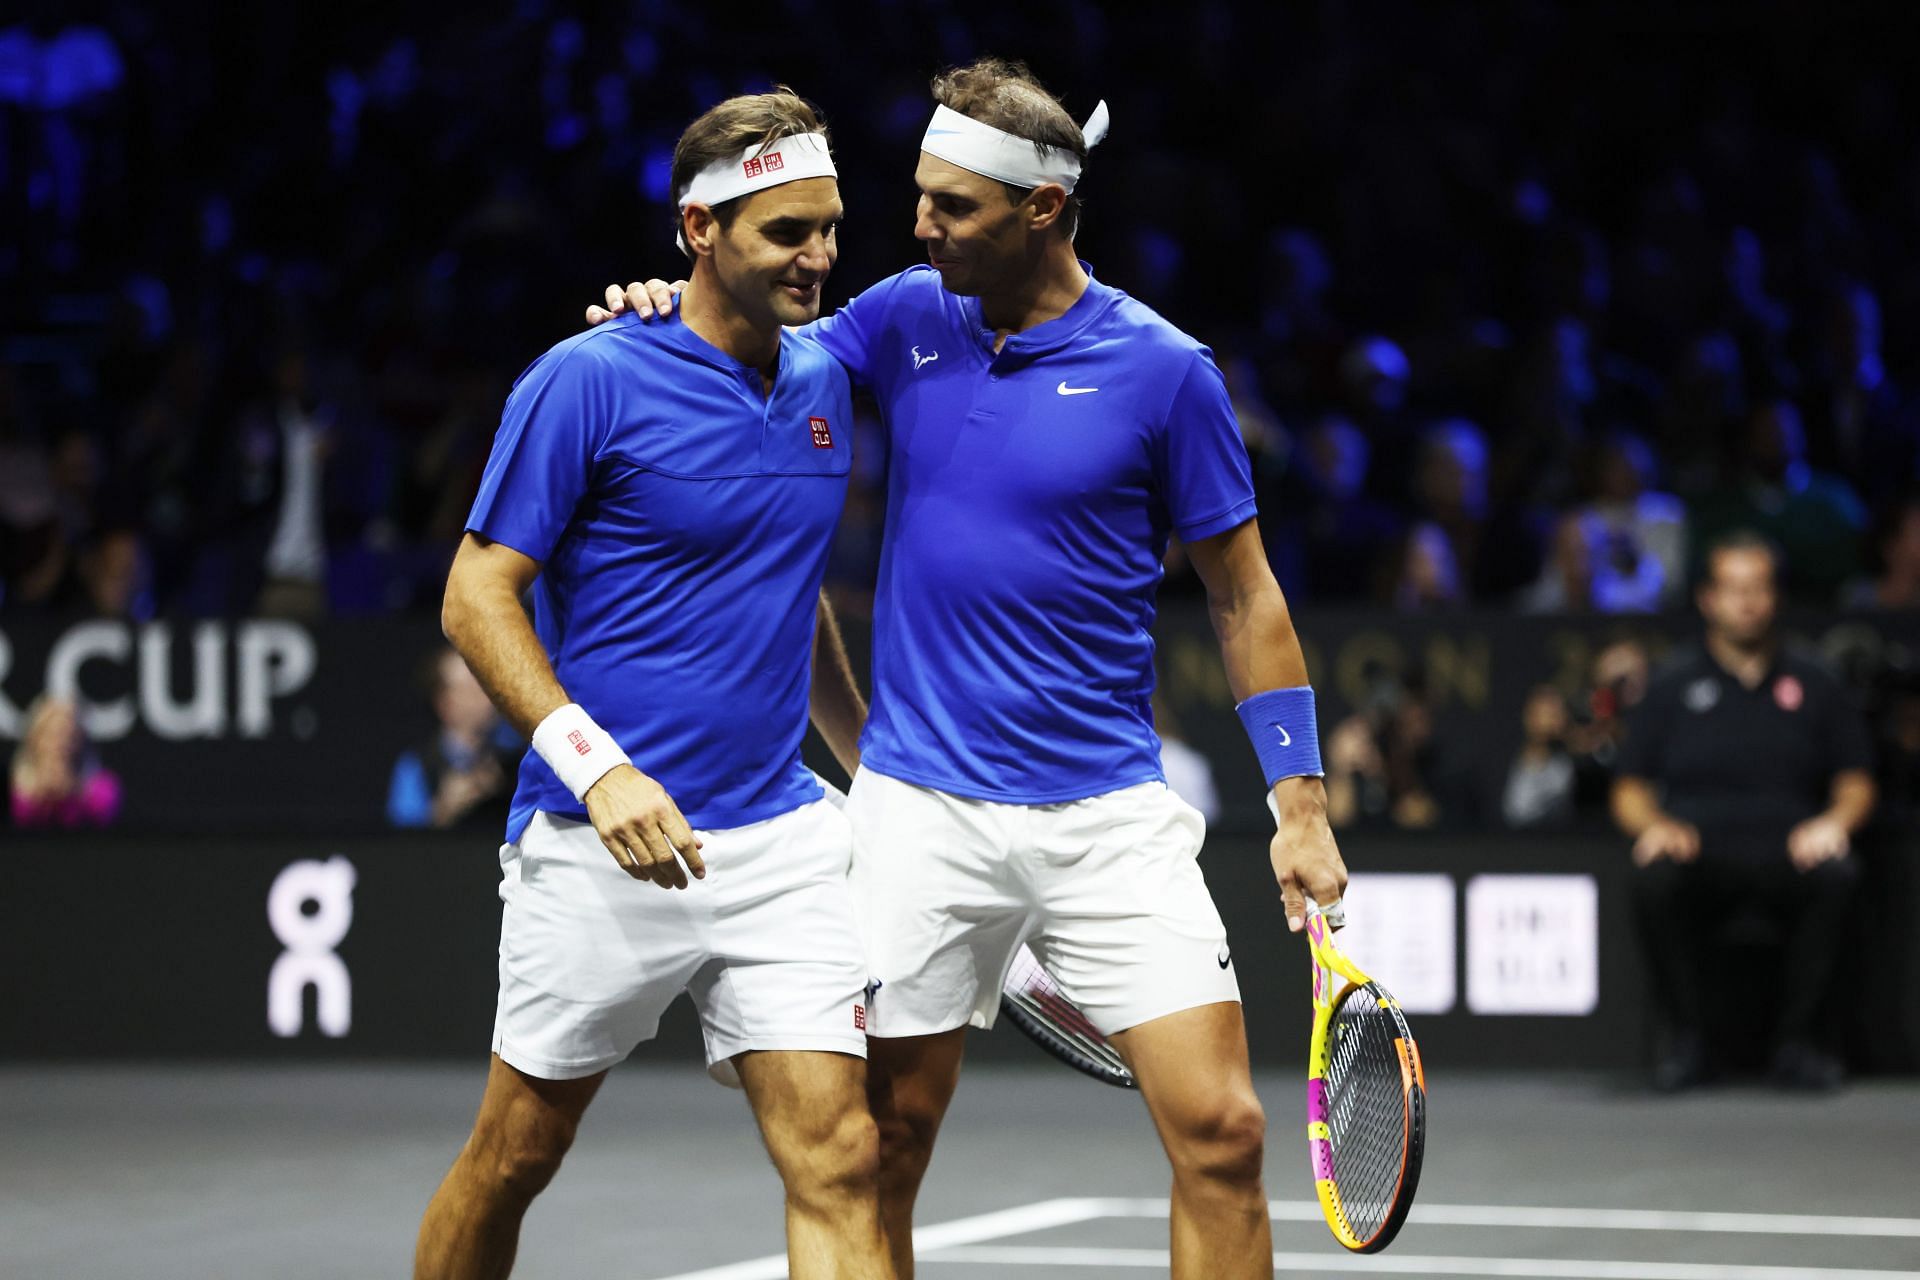 Roger Federer and Rafael Nadal at the 2022 Laver Cup.